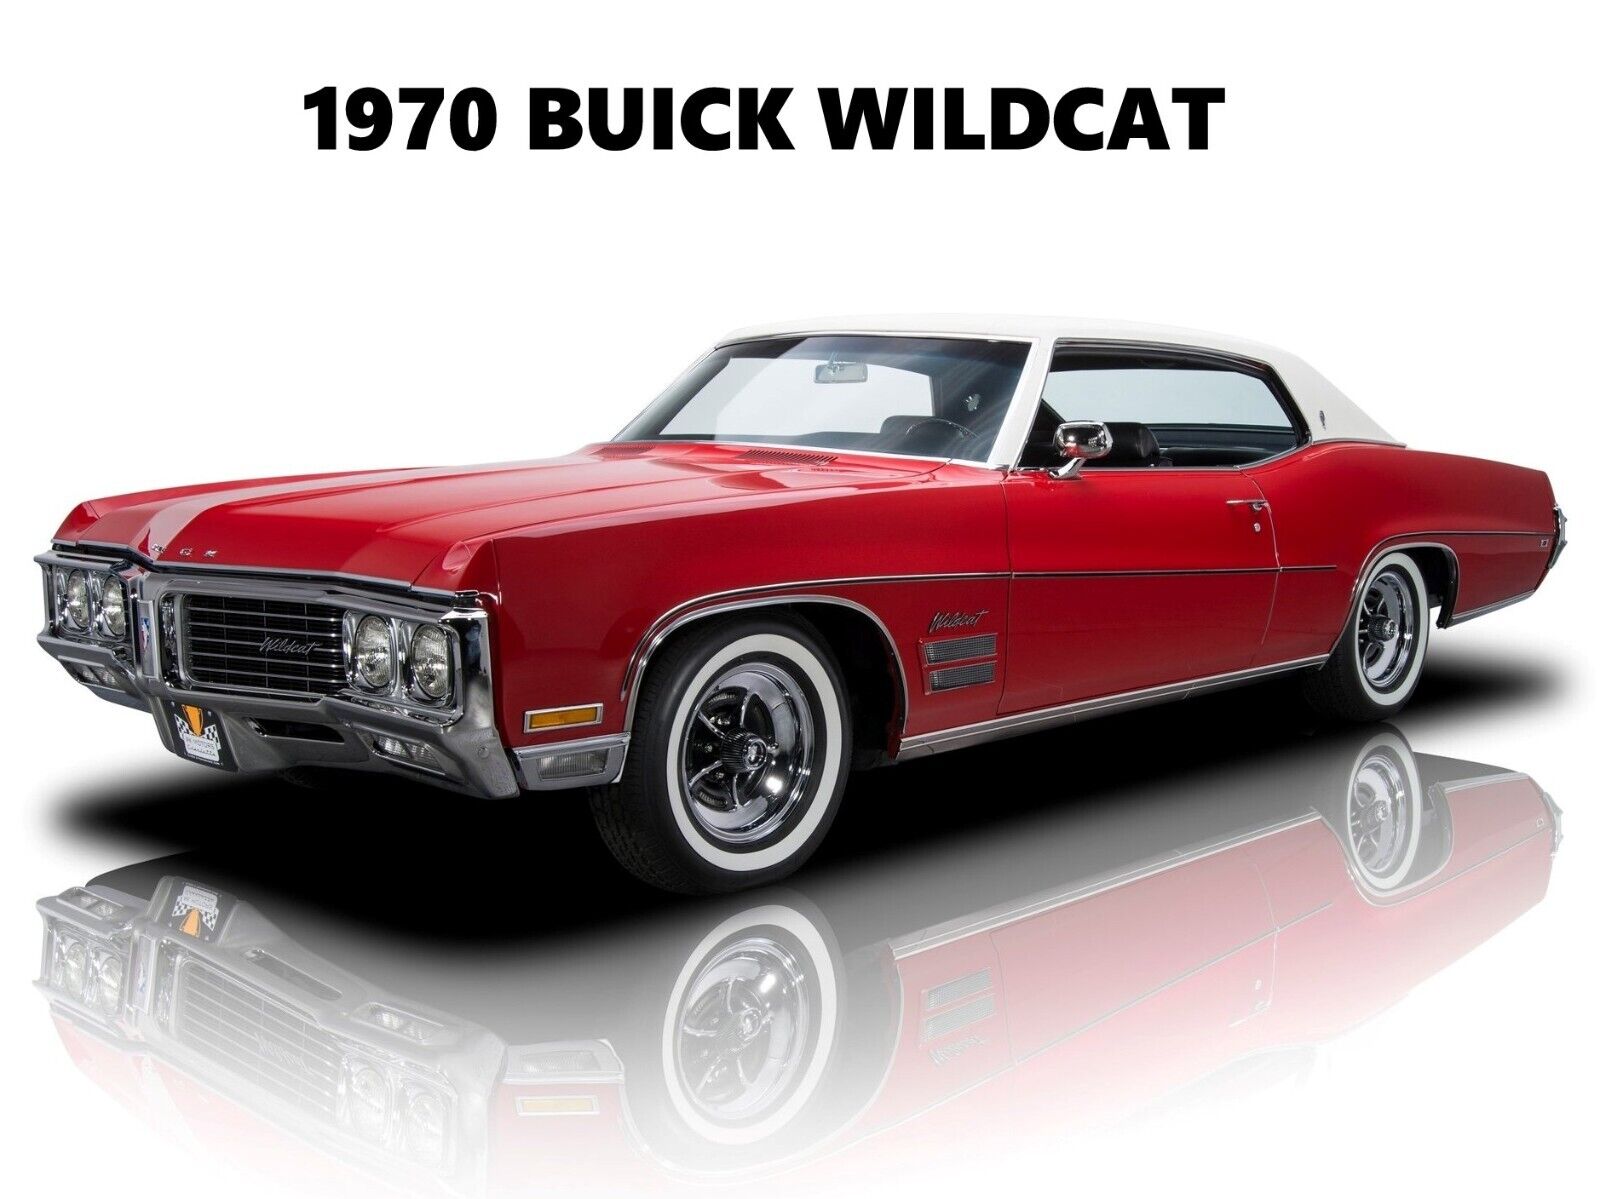 1970 Buick Wildcat NEW Metal Sign: Original Look in Red & White - Large Size